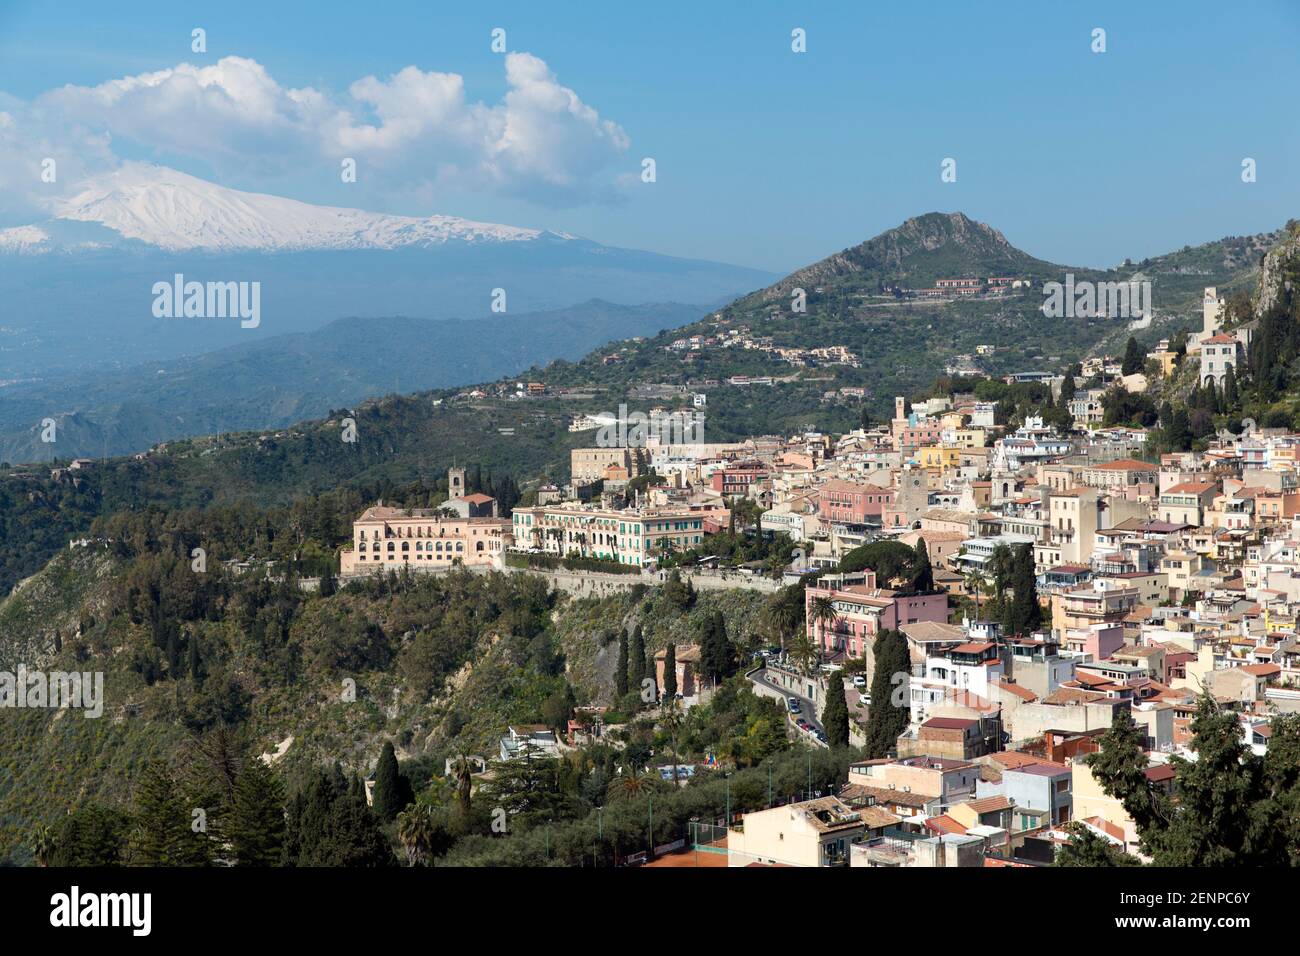 Italy, Sicily, Taormina, a view of the town and Mount Etna Stock Photo